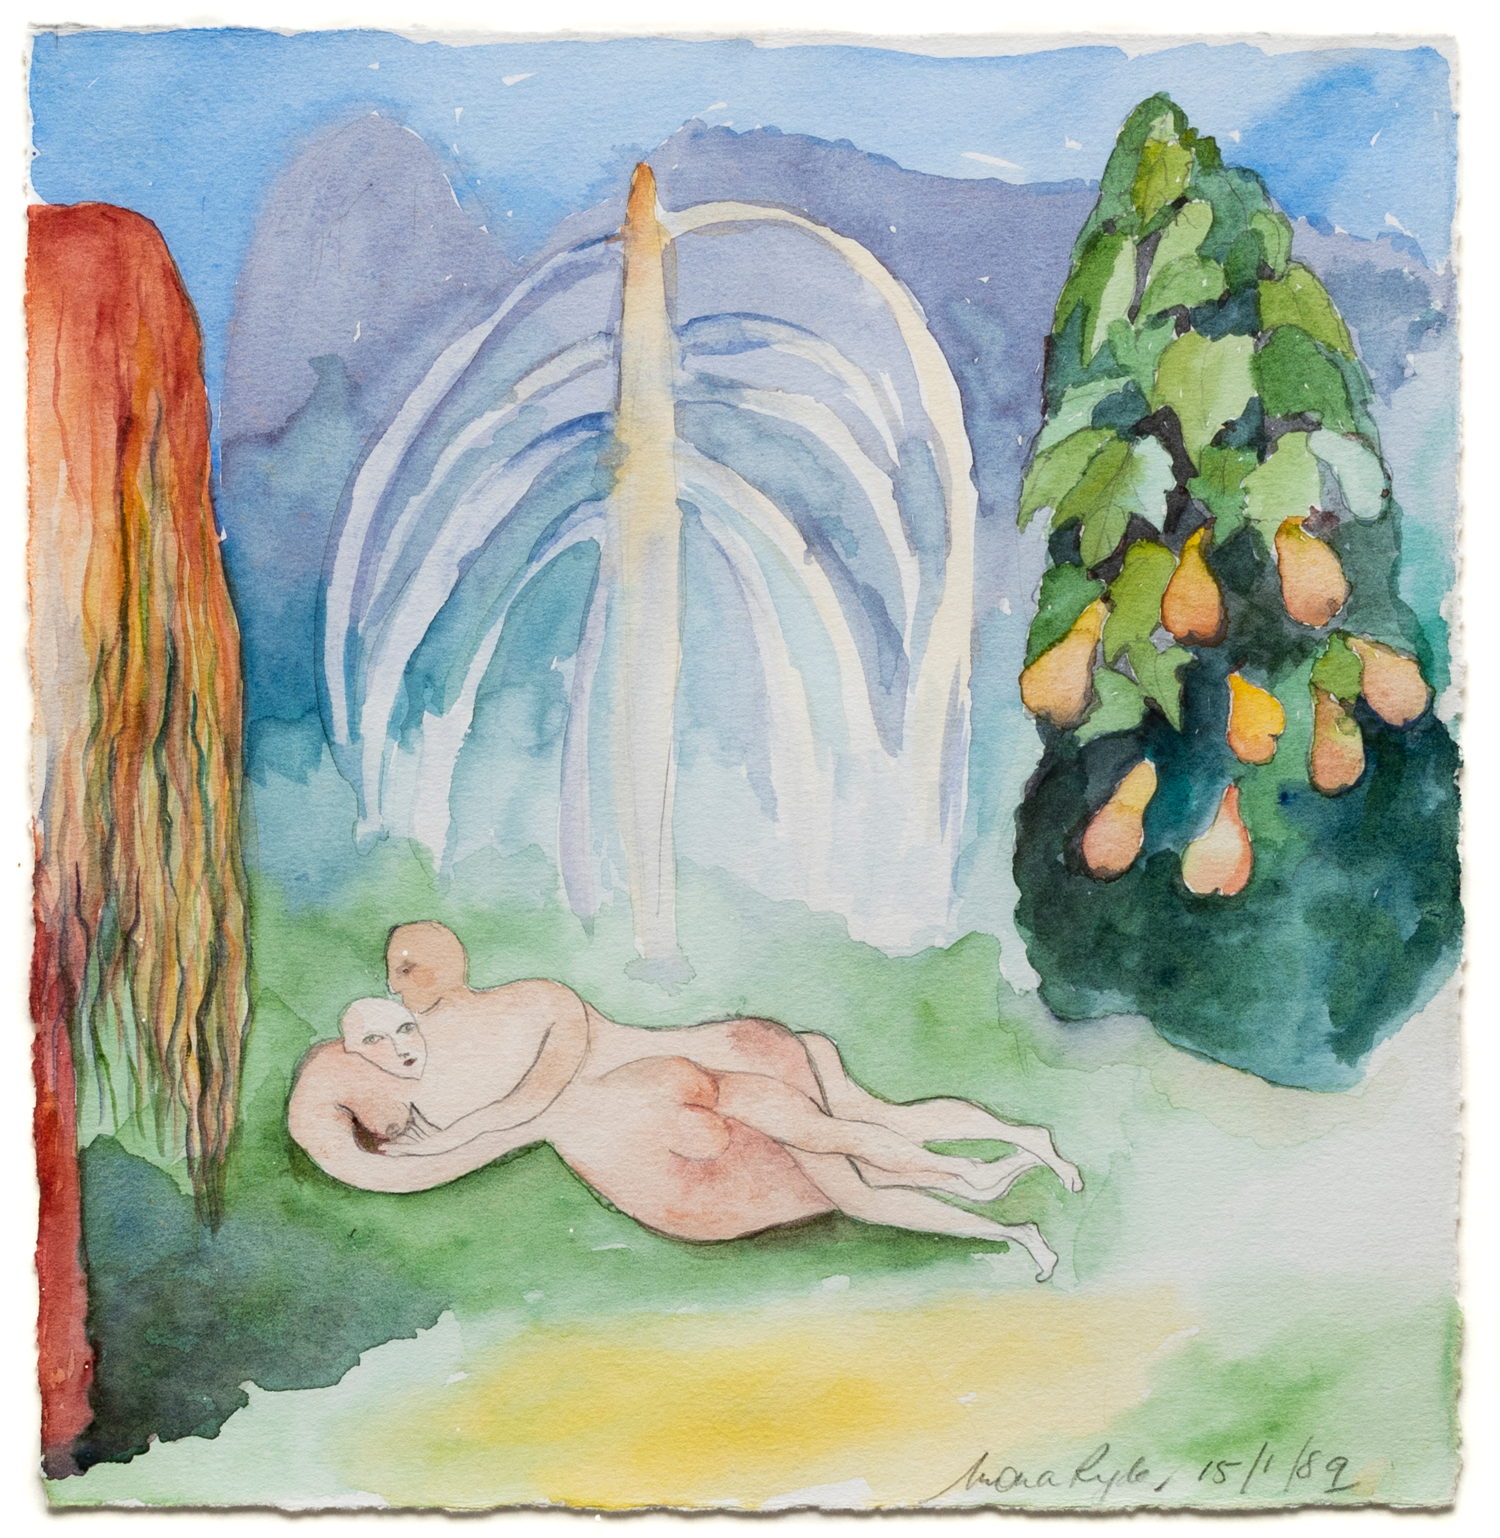 Mona RYDER Garden of heavenly delights 1989, watercolour on paper. Courtesy of the artist.